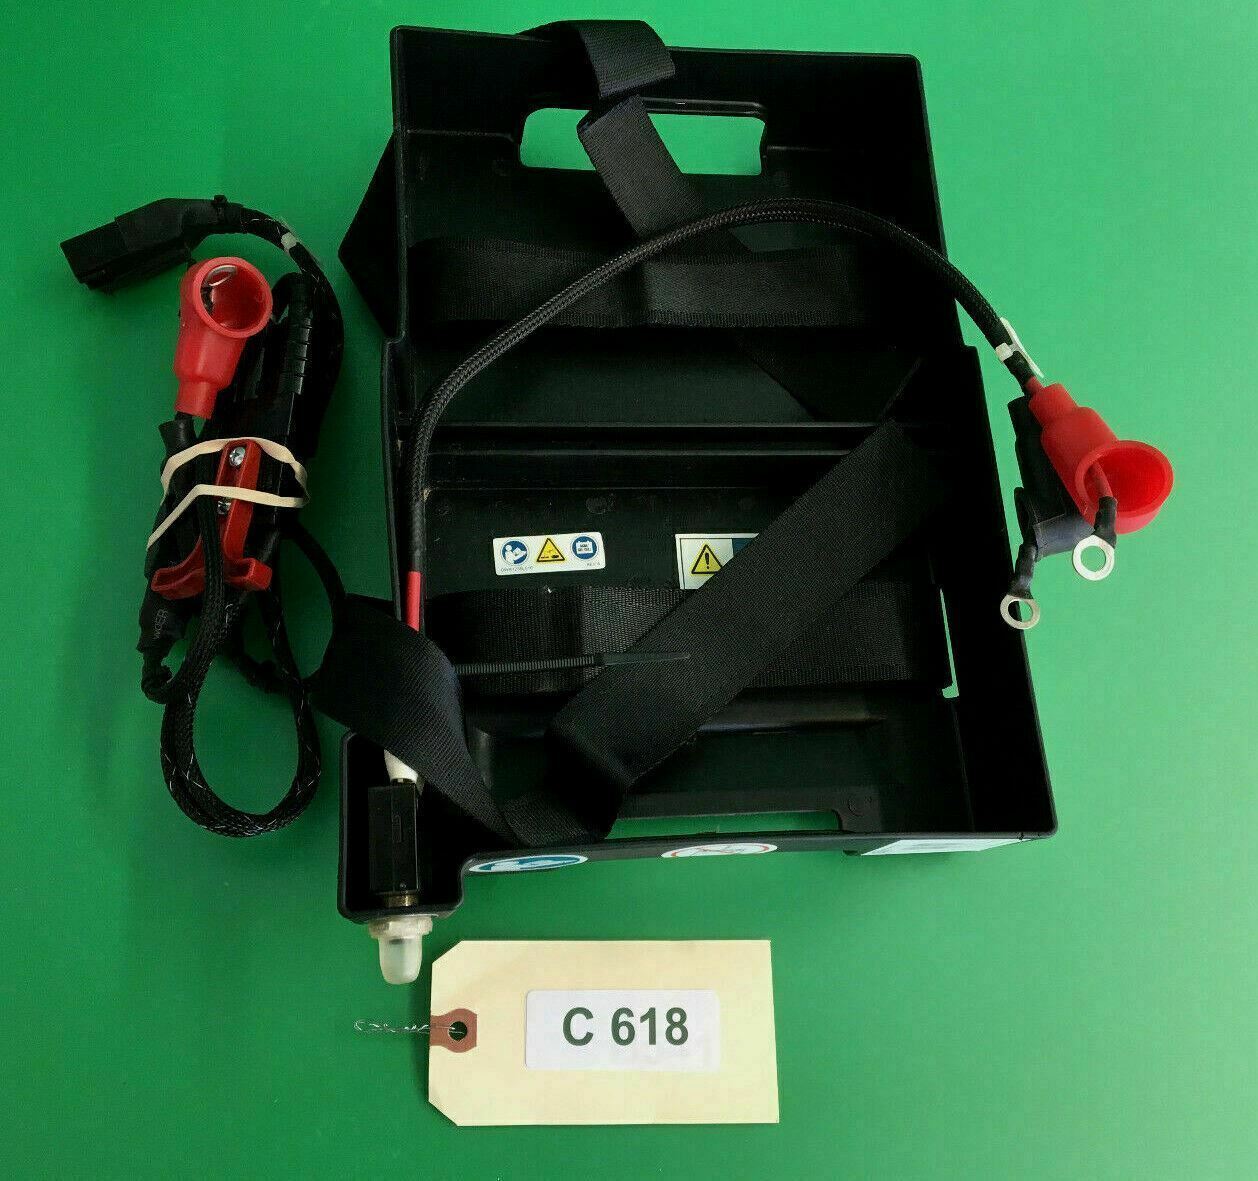 Battery Box Tray & Battery Harness for Pride J6 Power Wheelchair  #C618